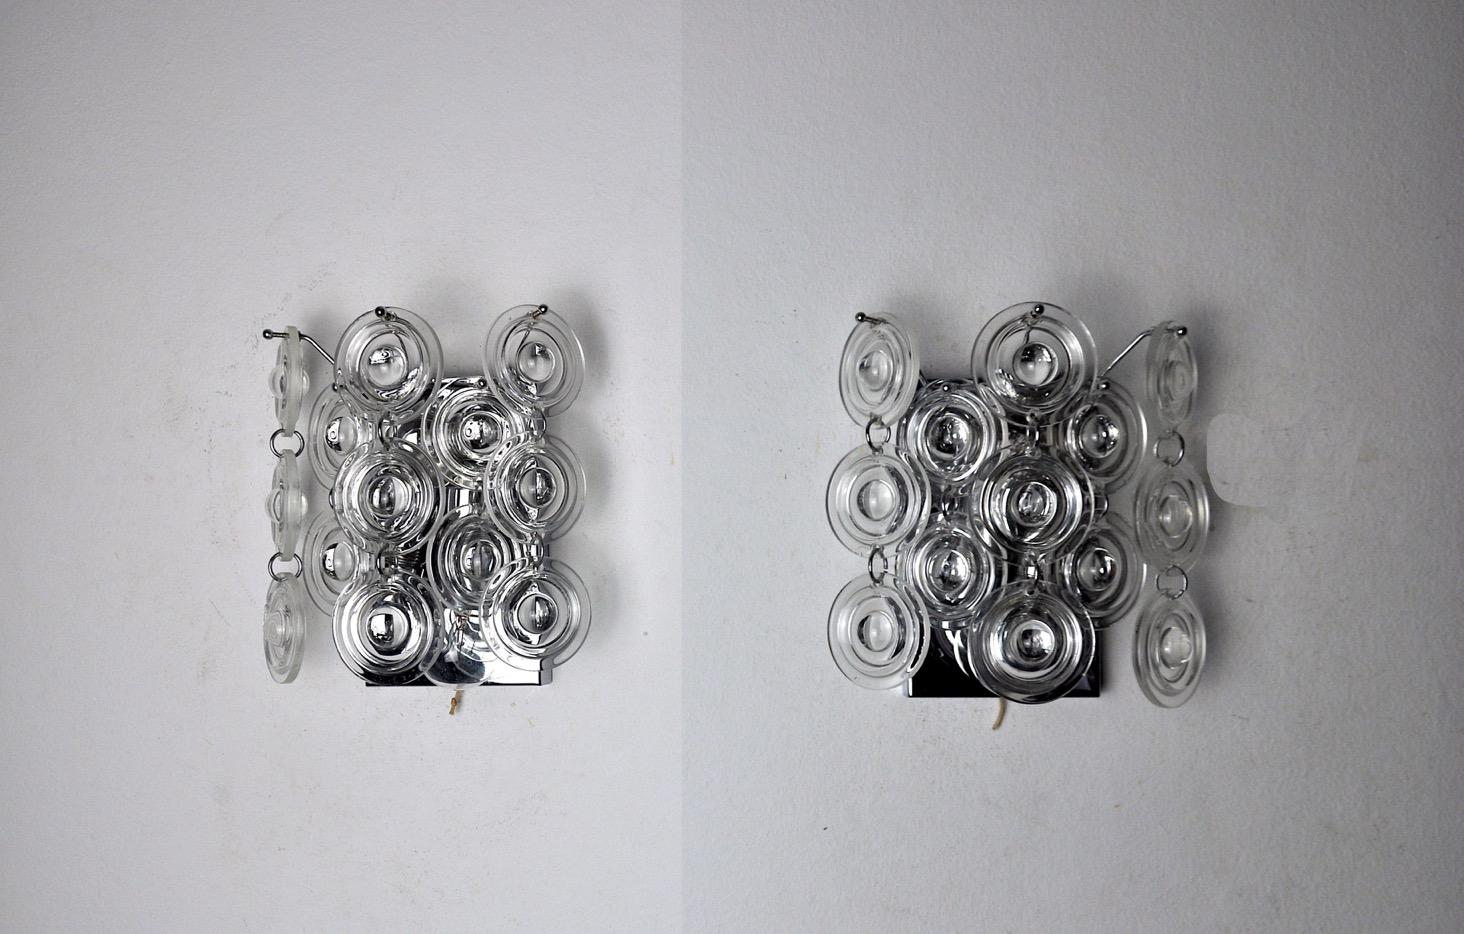 Very nice pair of oscar torlasco wall lights produced in italy in the 70s. Murano glass and chromed metal structure. Unique object that will illuminate wonderfully and bring a real design touch to your interior. Electricity checked, mark of time in